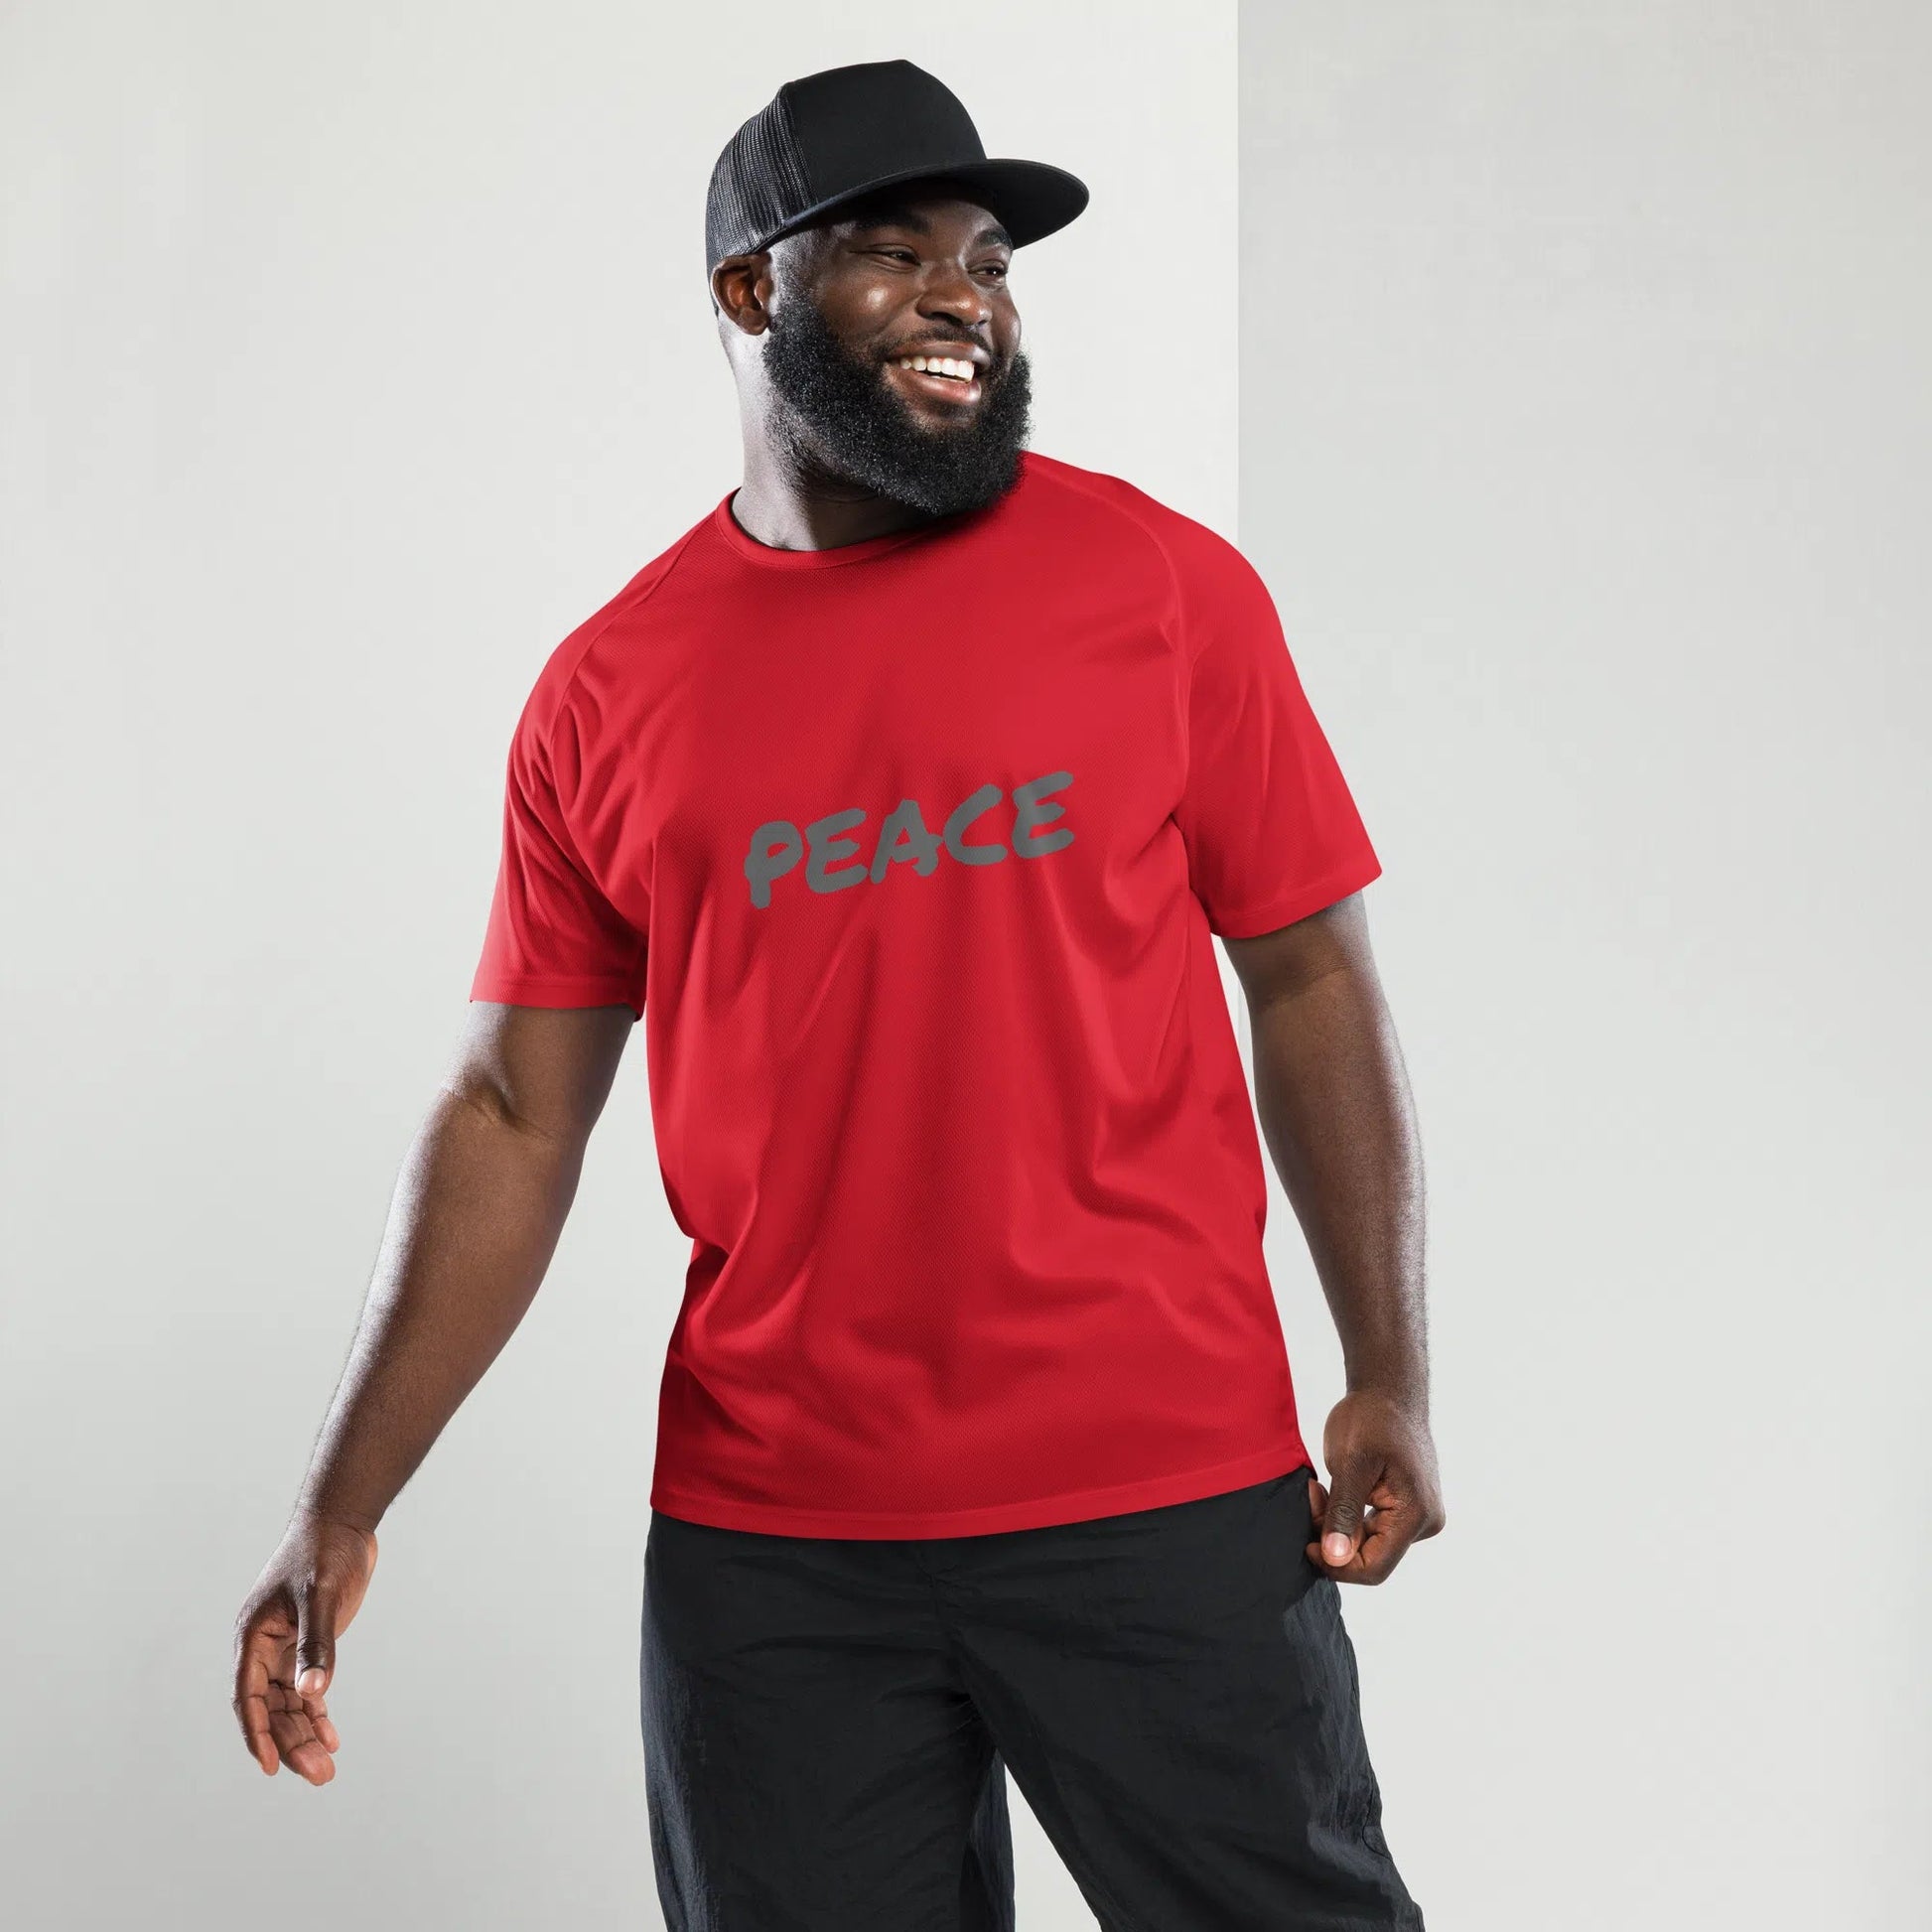 Men's Performance Sports Jersey - Breathable and Durable for All Your Athletic Needs